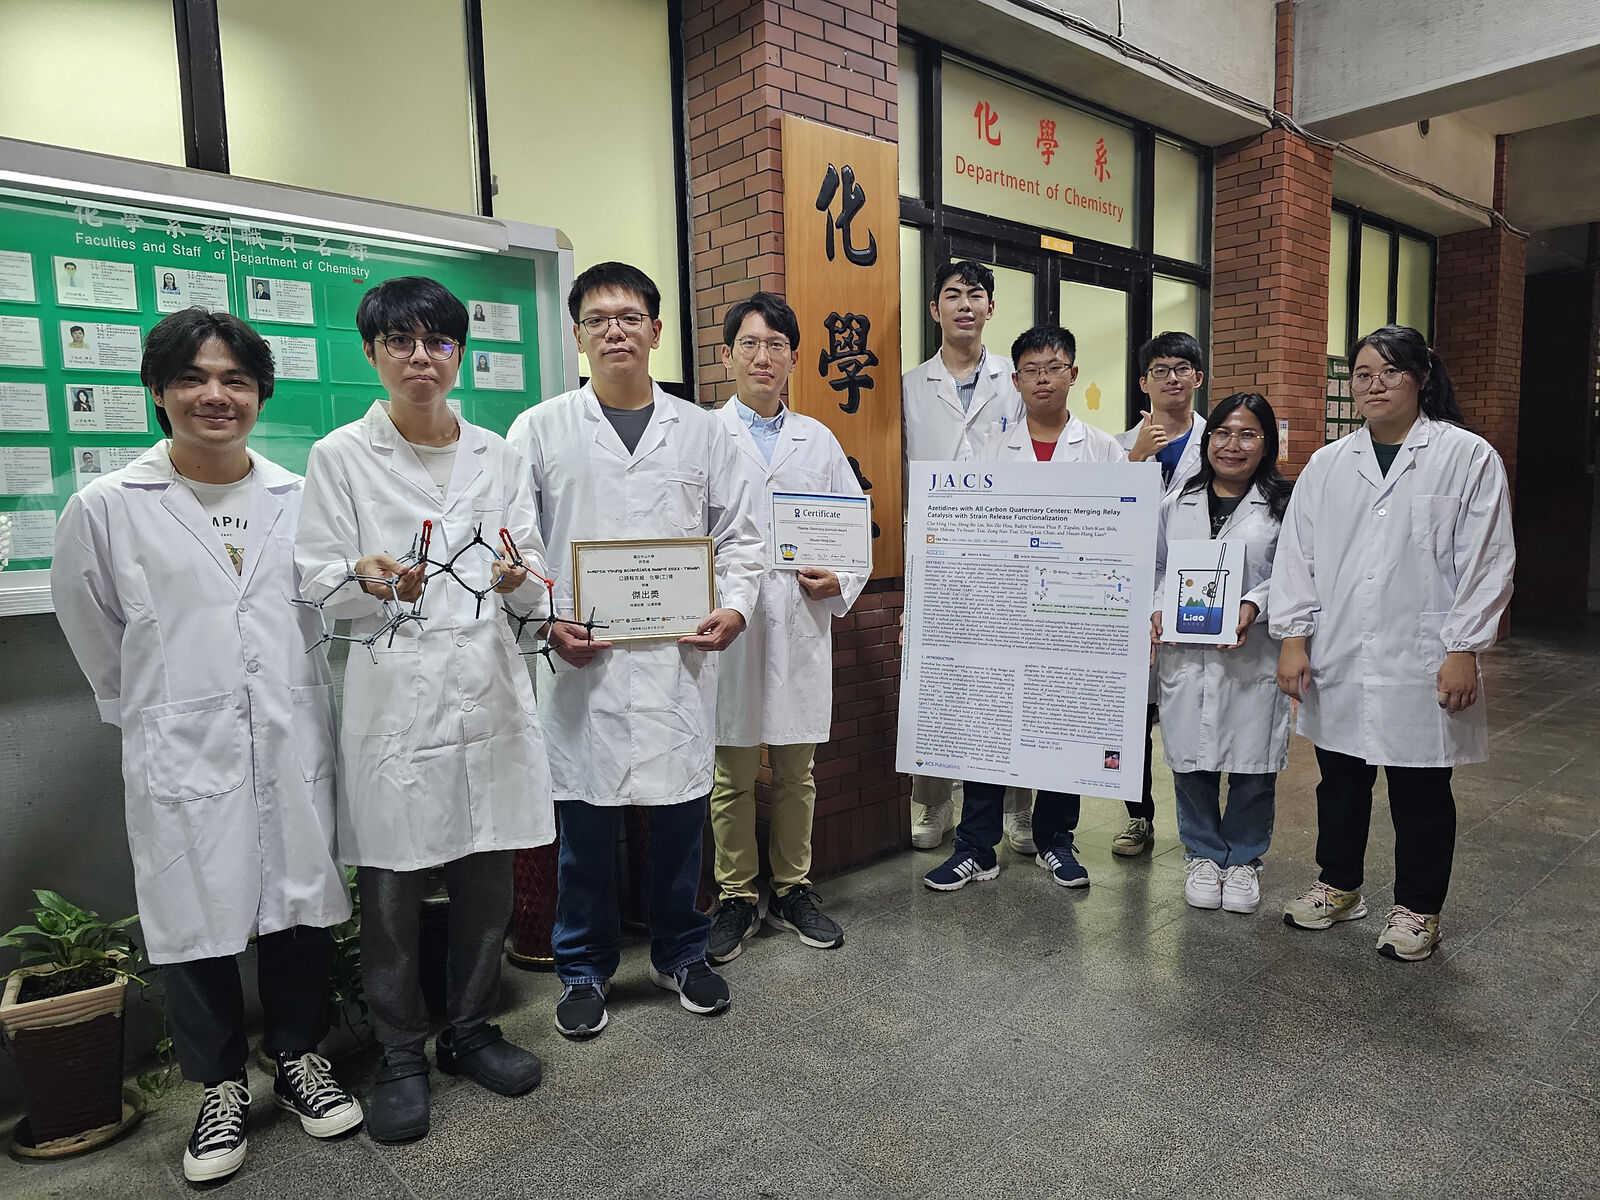 After four years of in-depth research, the group of Hsuan-Hung Liao (fourth from the left), an associate professor in the Department of Chemistry at National Sun Yat-sen University (NSYSU) and a recipient of the Yushan Young Fellow Program, pioneered the world's first polar-radical relay catalysis strategy, which not only successfully prepared the key molecular structure "Azetidine," but also successfully applied it to the synthesis of small molecule drugs, and developed two new drug candidates. This innovative research result was published in the Journal of the American Chemical Society (JACS), an internationally renowned chemistry journal.